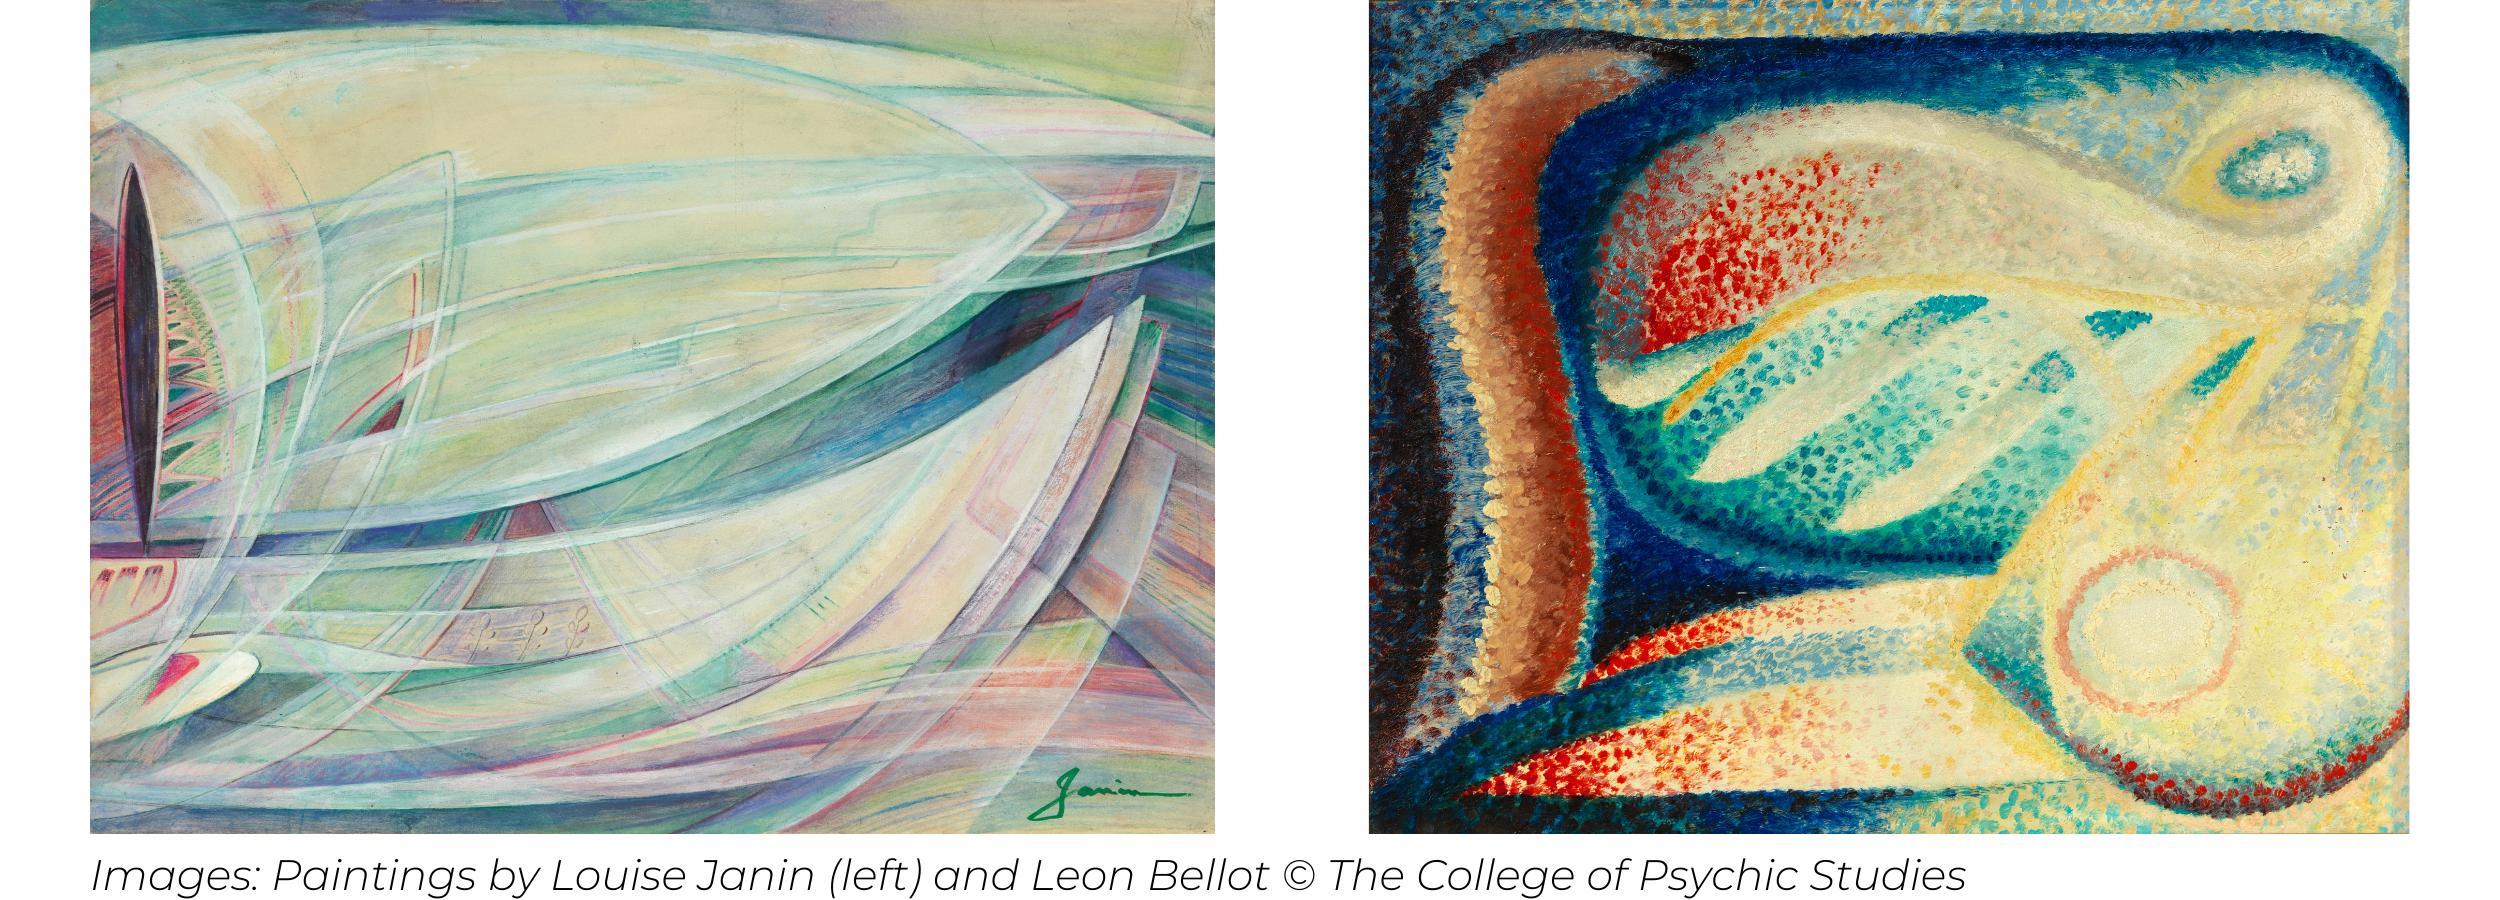 Paintings by Louise Janin and Leon Bellot © The College of Psychic Studies